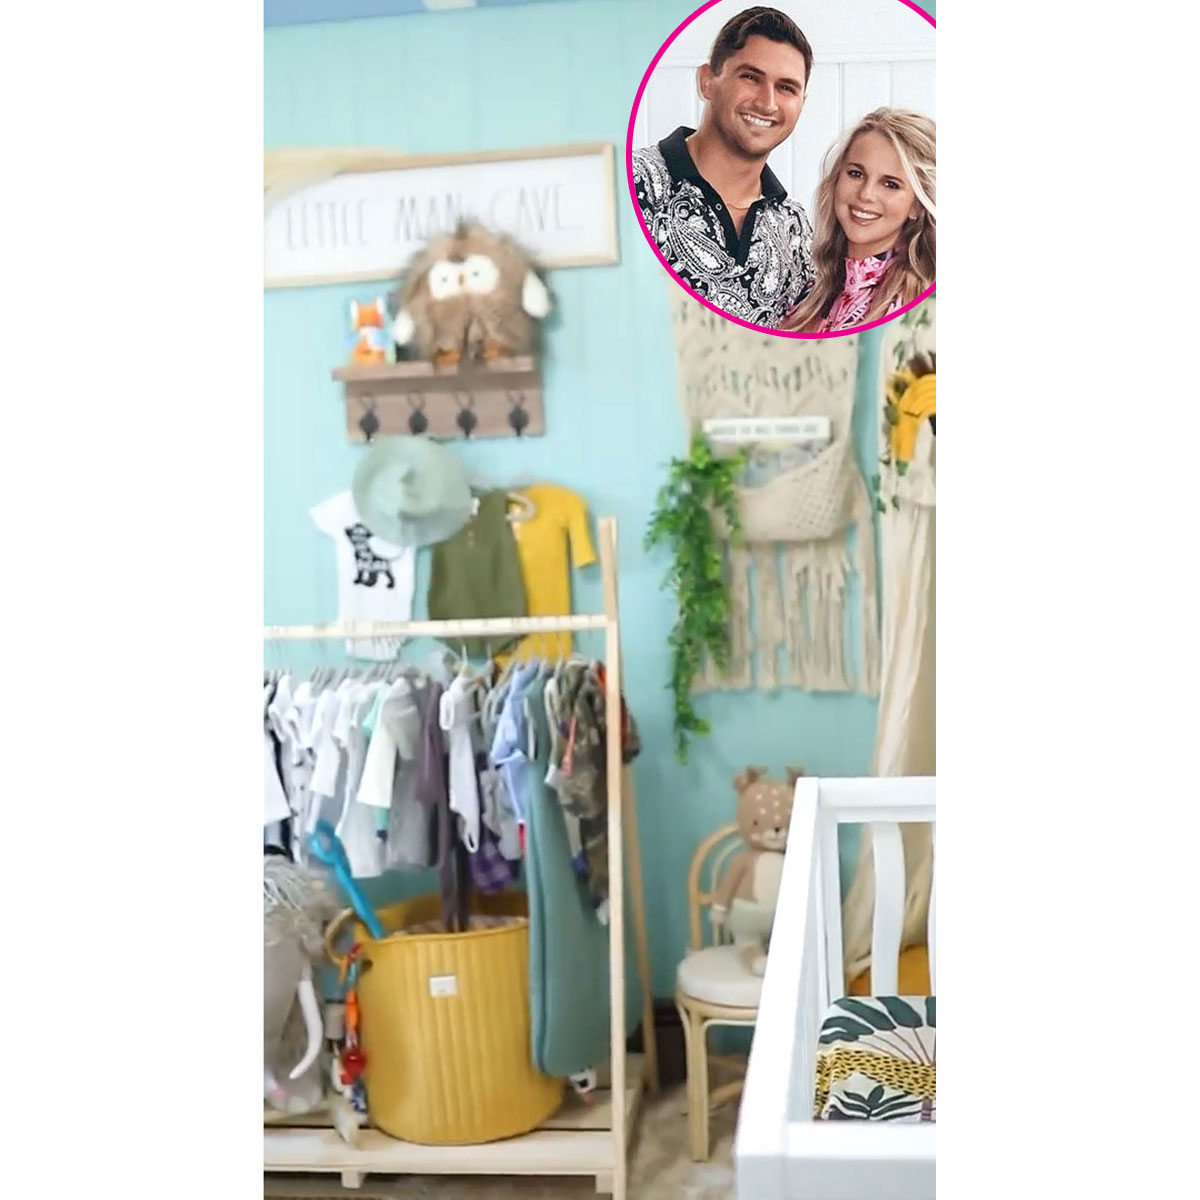 Big Brother Pregnant Nicole Franzel and Victor Arroyo Reveal Son Nursery Gallery